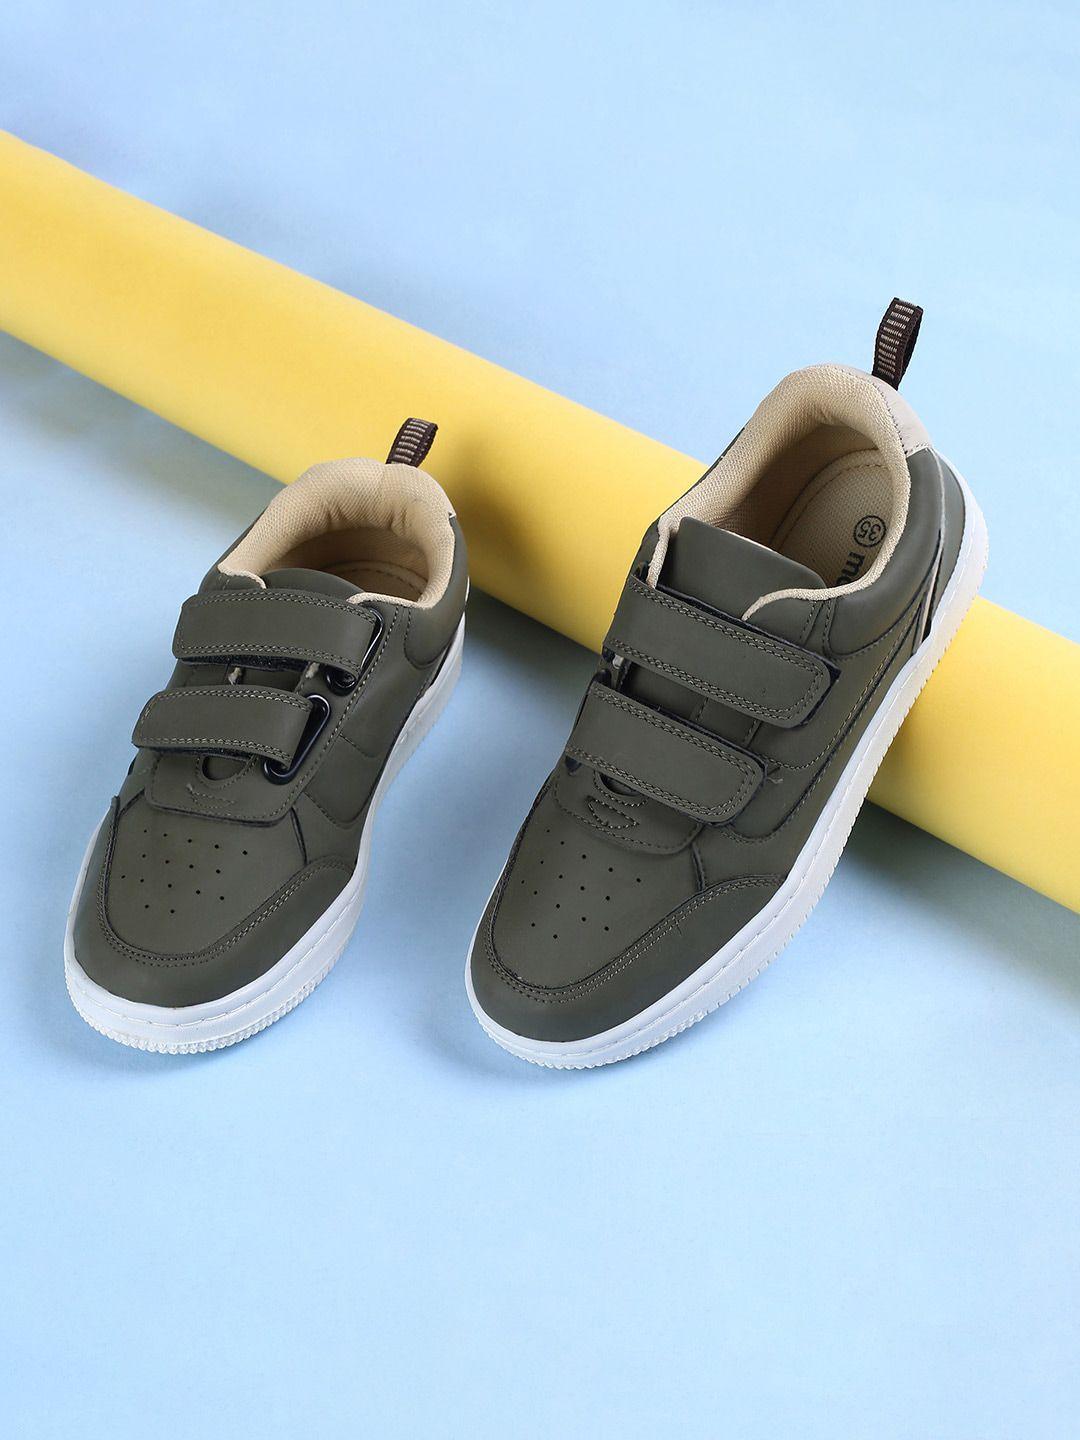 max-boys-perforated-canvas-velcro-sneakers